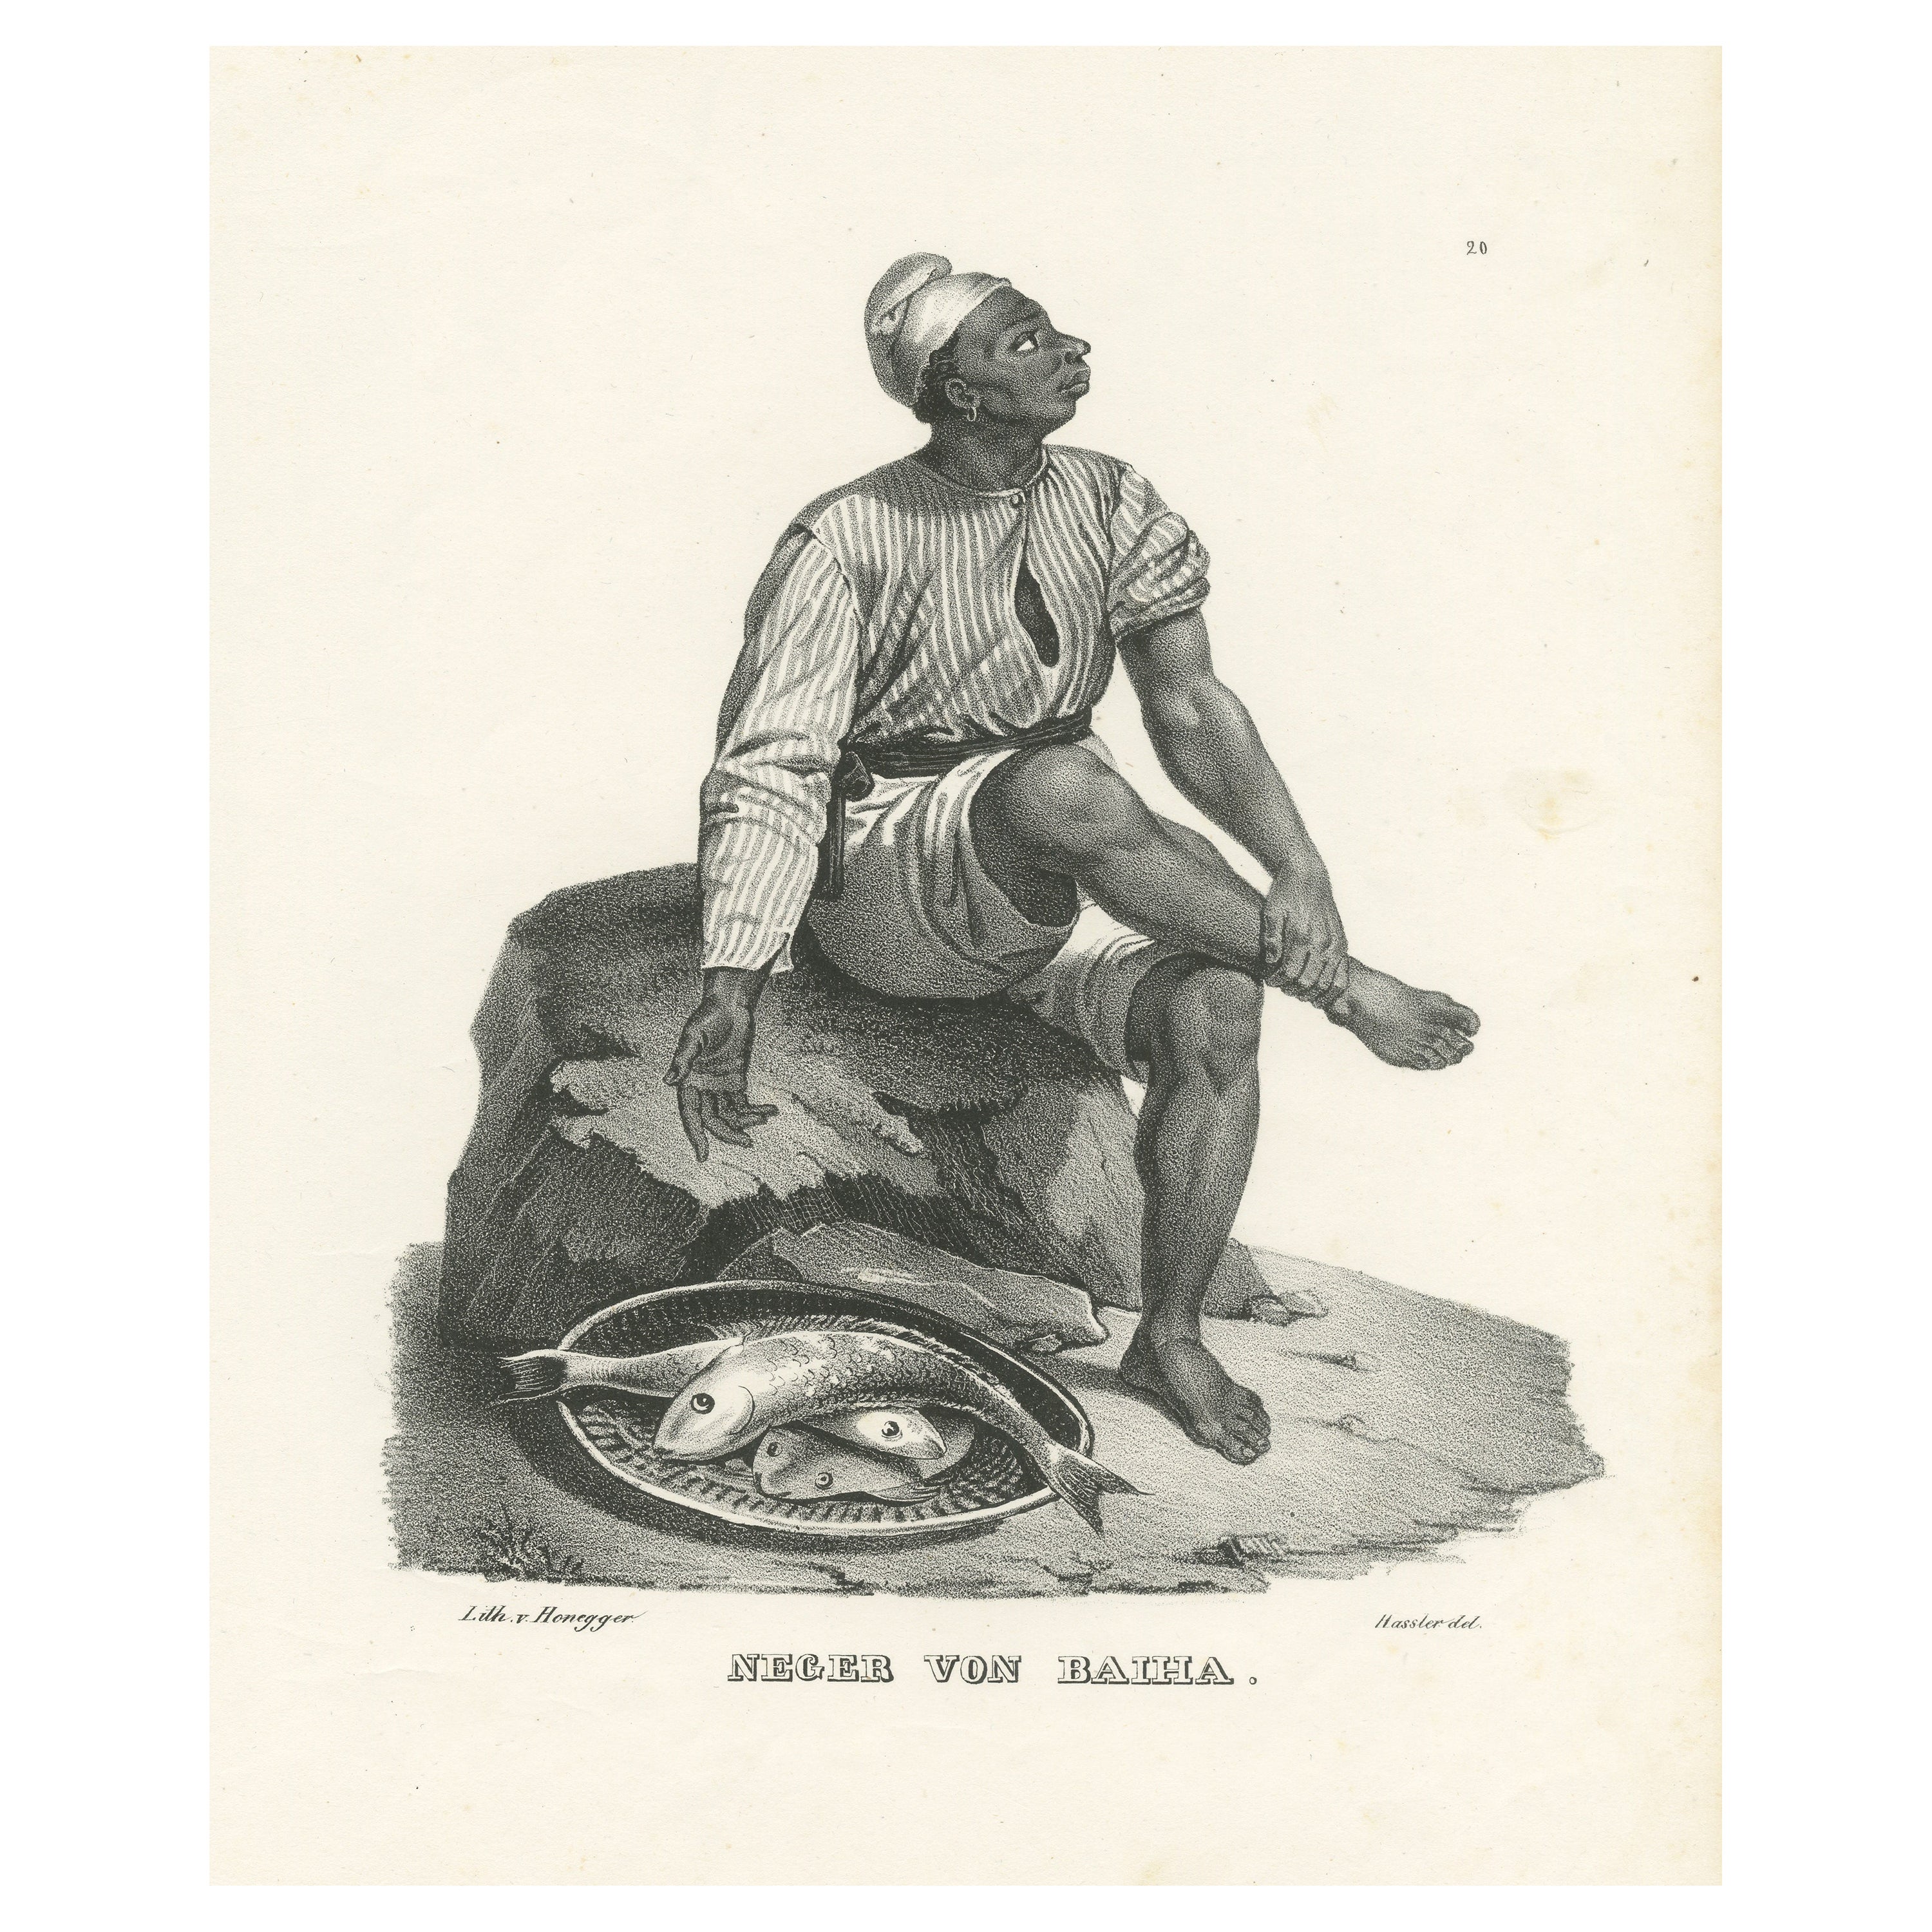 Antique Steel Engraved Print showing a Native of Bahia, Brazil